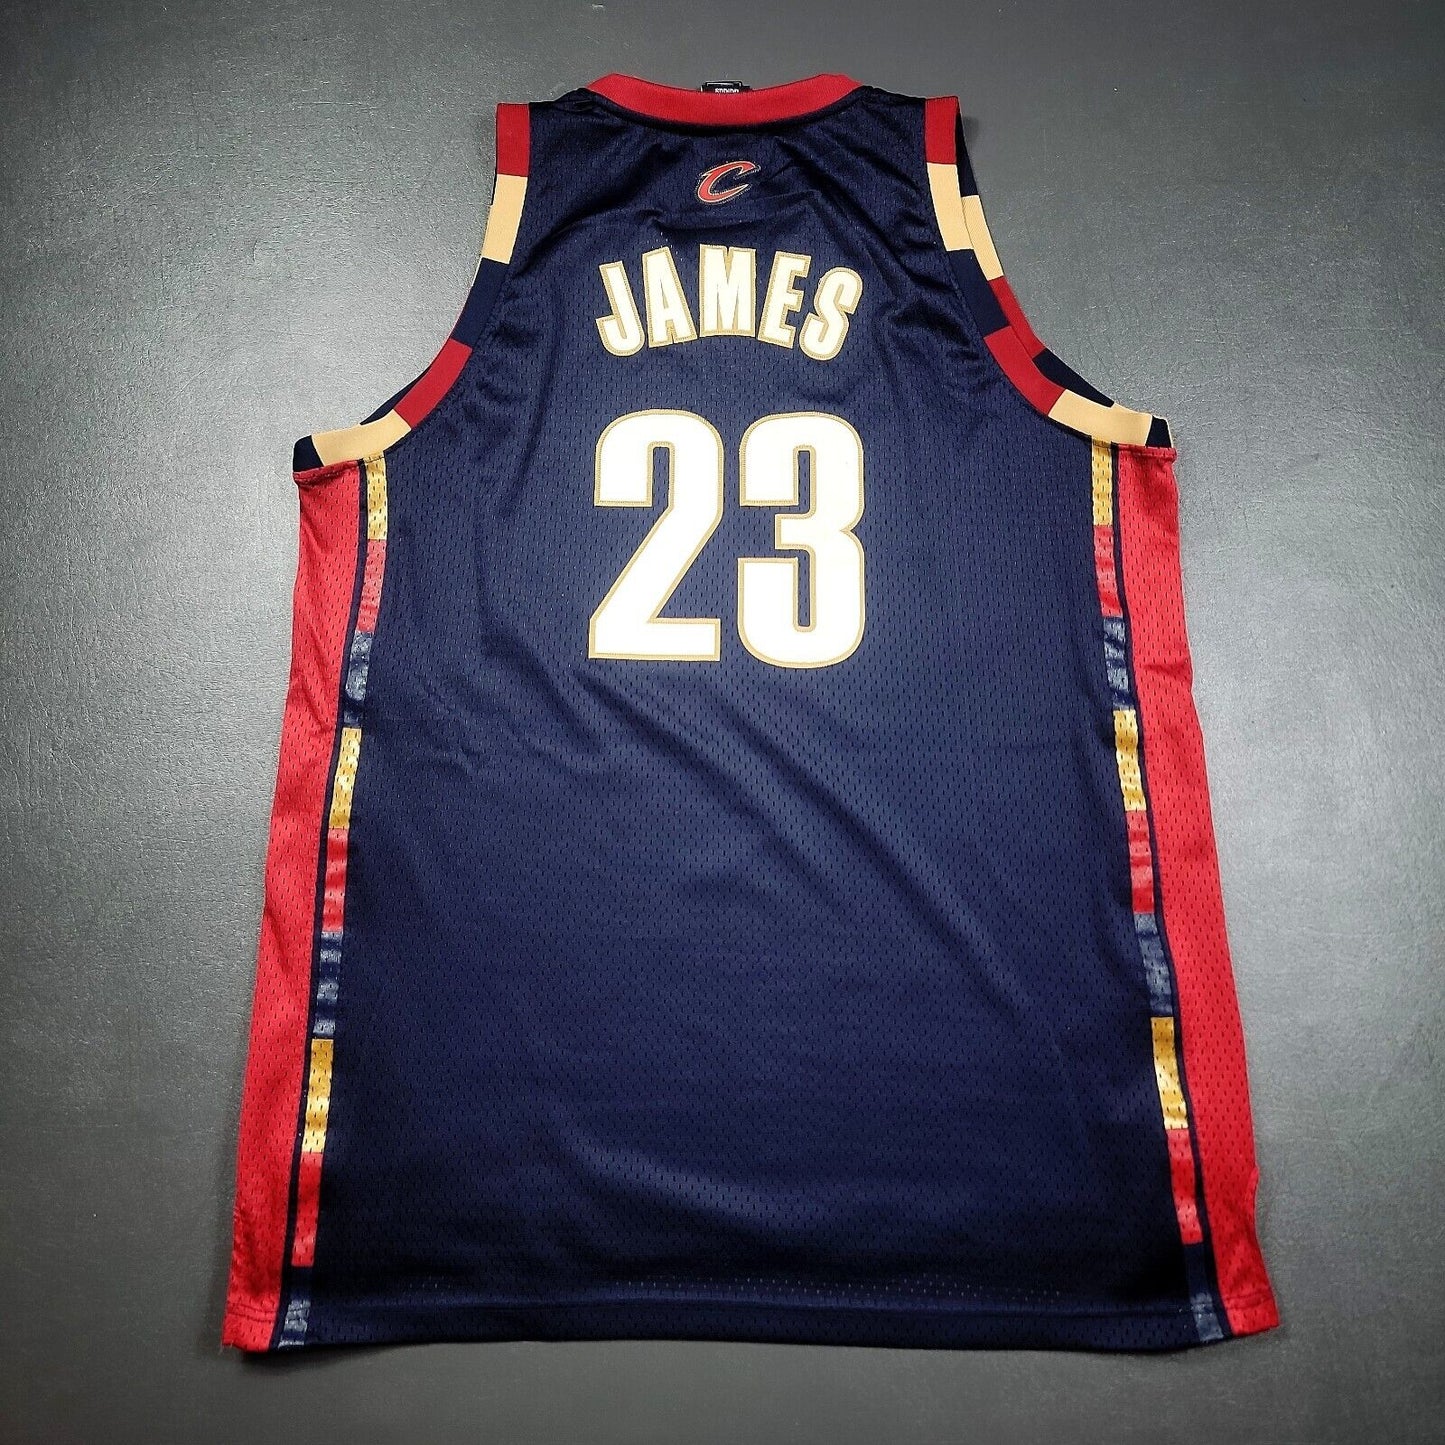 100% Authentic Lebron James Adidas Cavaliers Cavs Away Jersey Size 2XL 52 Mens